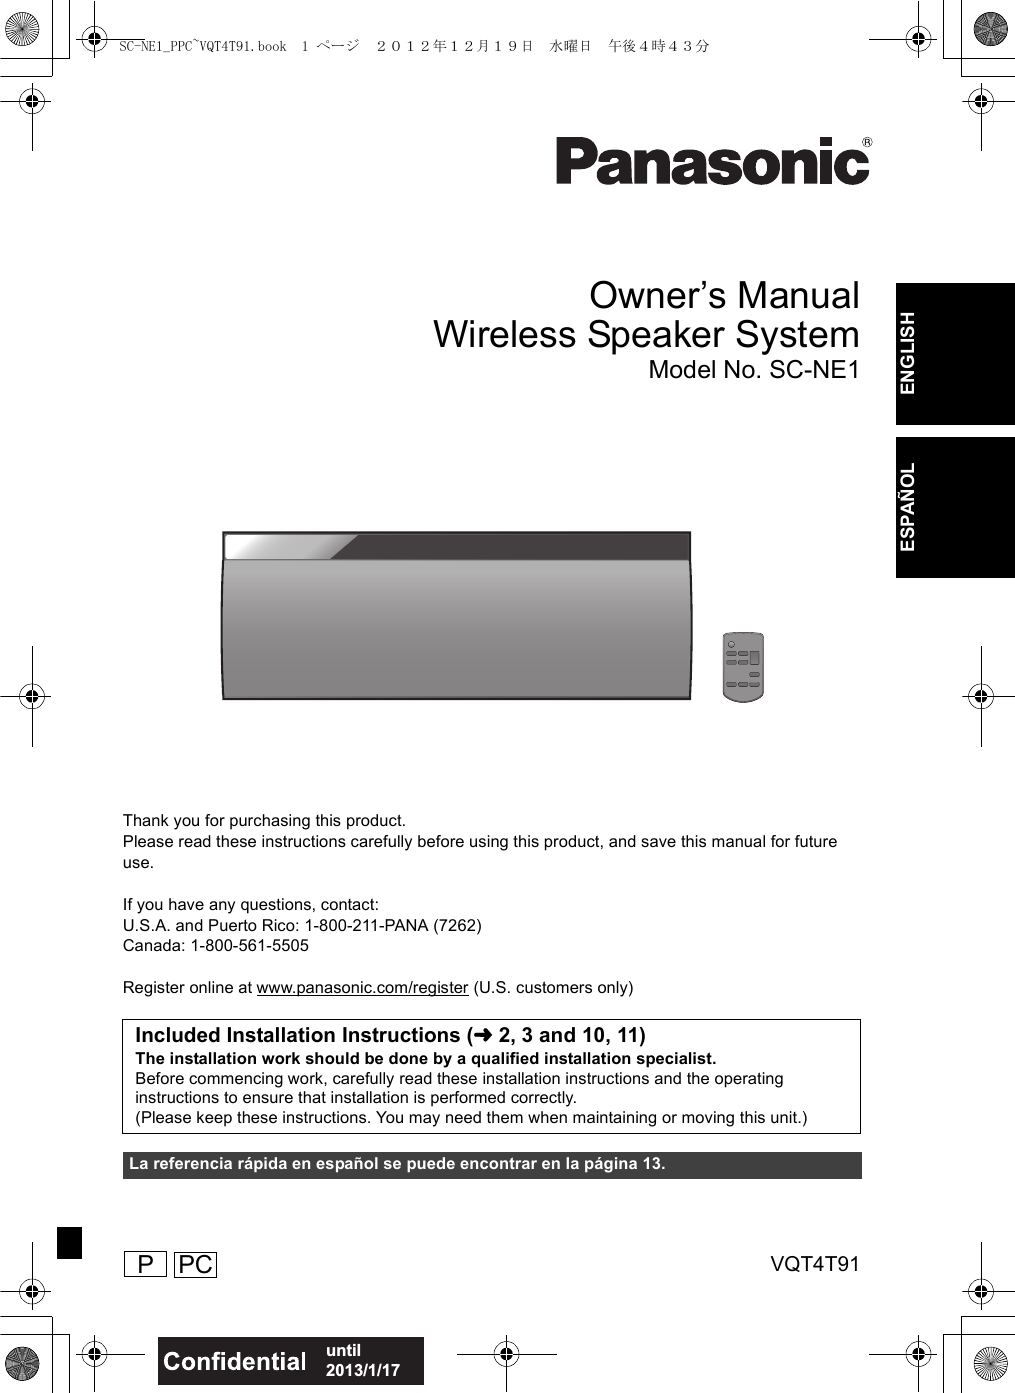 VQT4T91until 2013/1/17ENGLISHESPAÑOLOwner’s ManualWireless Speaker SystemModel No. SC-NE1Thank you for purchasing this product.Please read these instructions carefully before using this product, and save this manual for future use.If you have any questions, contact:U.S.A. and Puerto Rico: 1-800-211-PANA (7262)Canada: 1-800-561-5505Register online at www.panasonic.com/register (U.S. customers only)Included Installation Instructions (l2, 3 and 10, 11)The installation work should be done by a qualified installation specialist.Before commencing work, carefully read these installation instructions and the operating instructions to ensure that installation is performed correctly.(Please keep these instructions. You may need them when maintaining or moving this unit.)La referencia rápida en español se puede encontrar en la página 13. PPCSC-NE1_PPC~VQT4T91.book  1 ページ  ２０１２年１２月１９日　水曜日　午後４時４３分